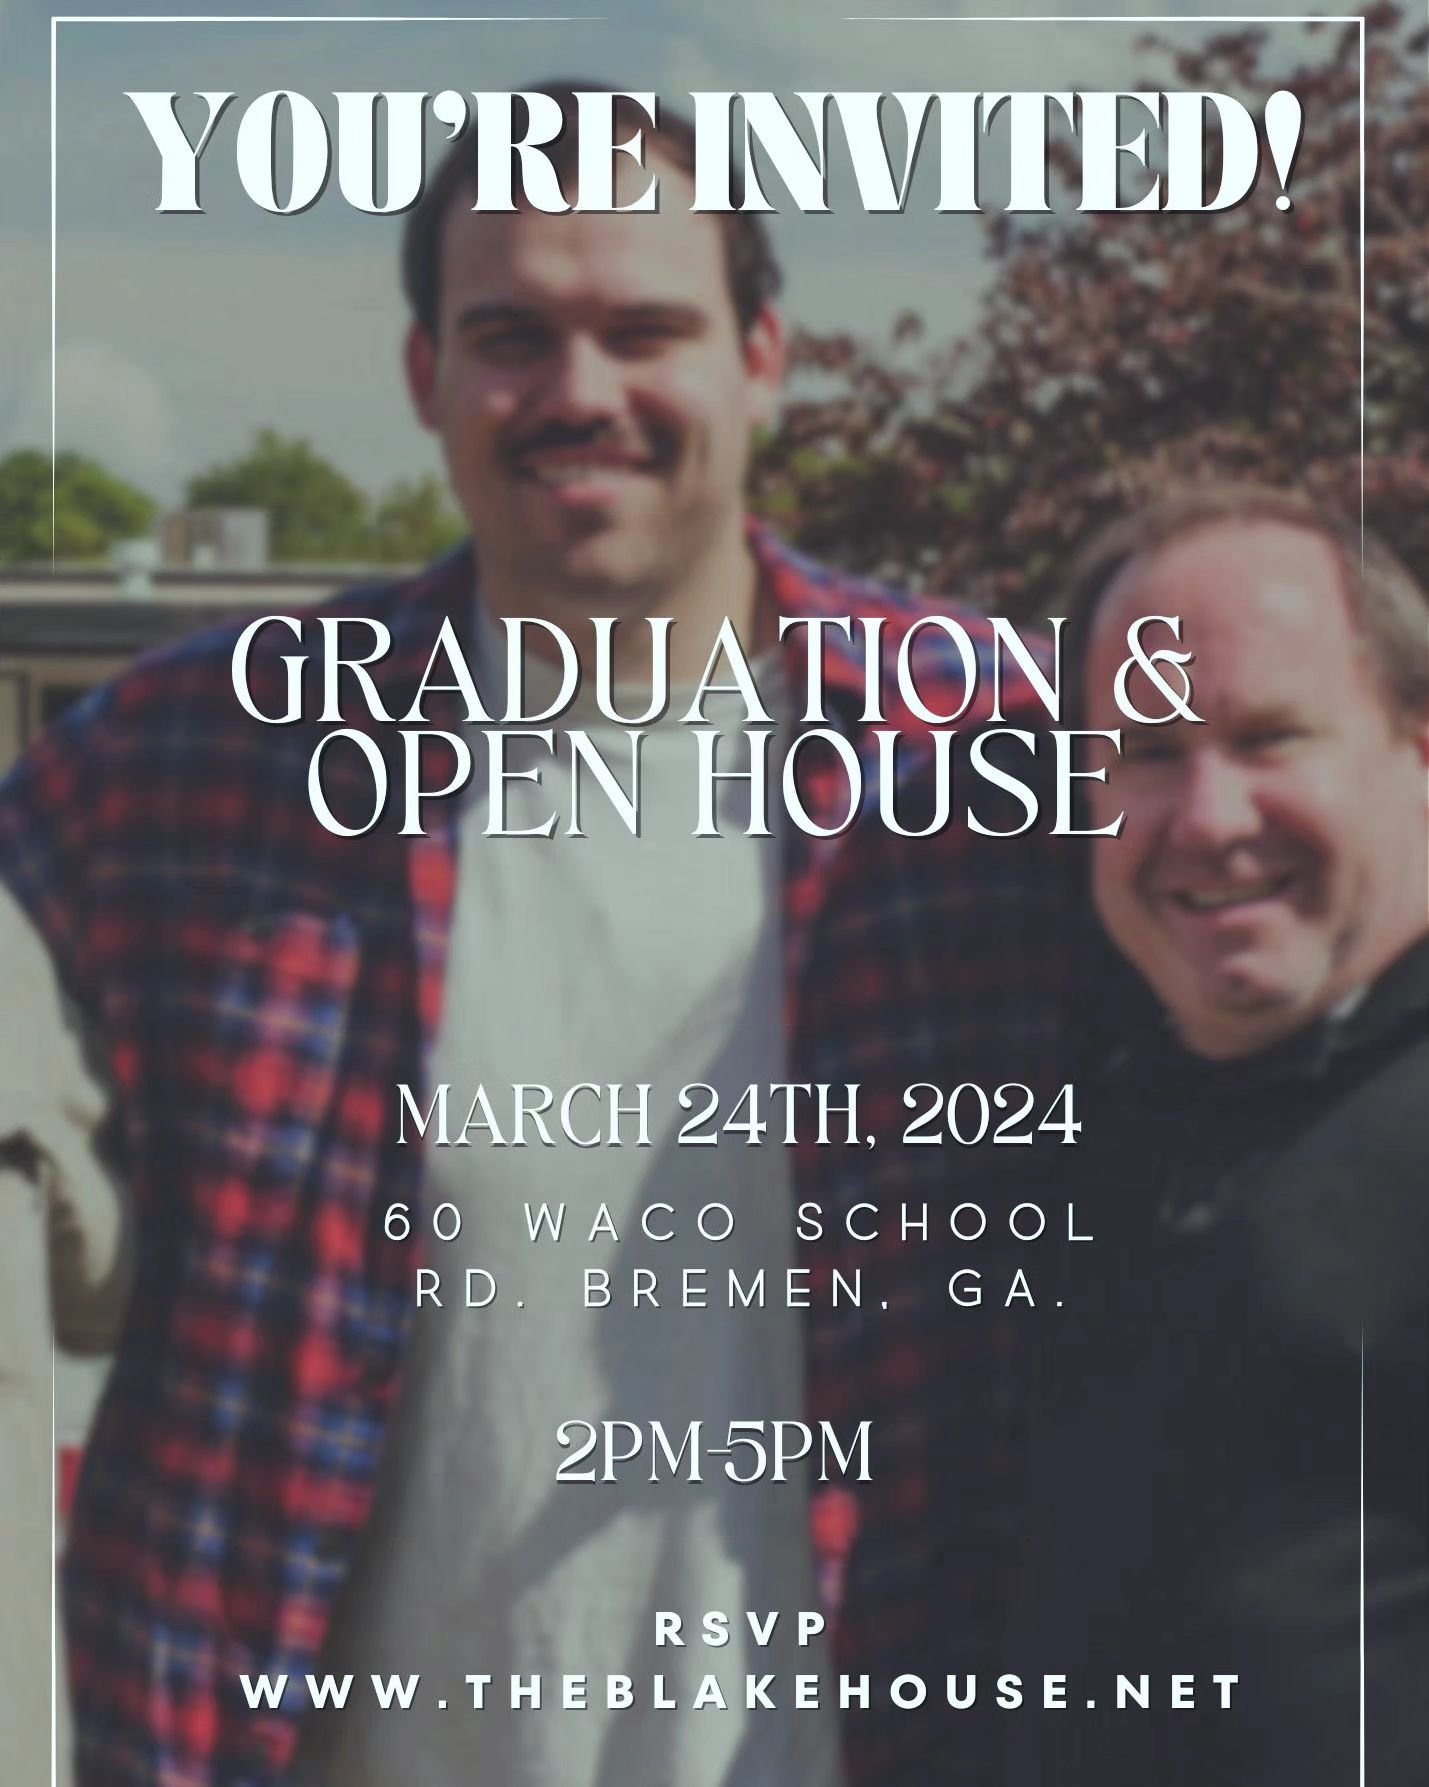 🎉This Sunday, March 24th!🎉

We're thrilled to invite you to our open house here at The Blake House! Share heartwarming testimonies, celebrate our esteemed alumni, and get an exclusive look at our newly renovated interior. RSVP at the link in bio.

